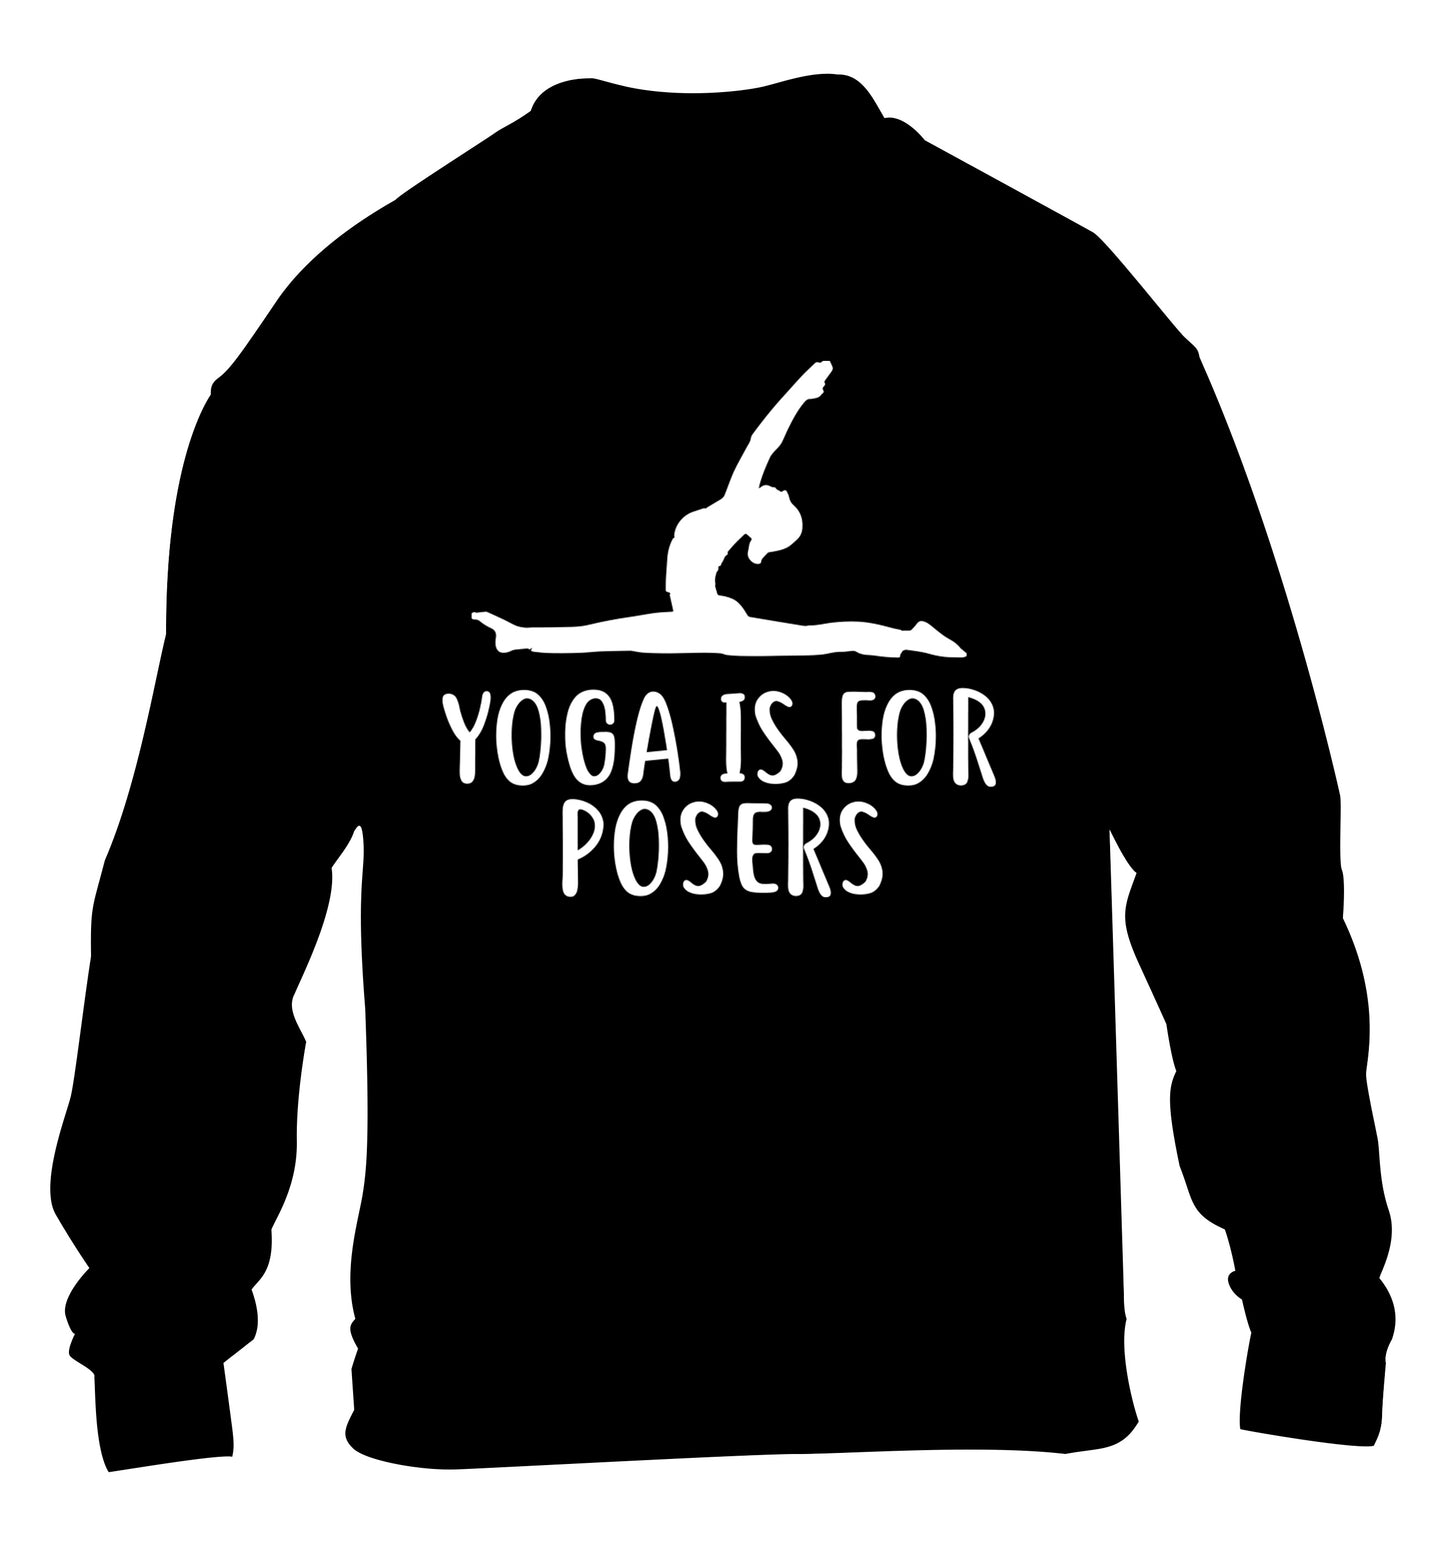 Yoga is for posers children's black sweater 12-13 Years